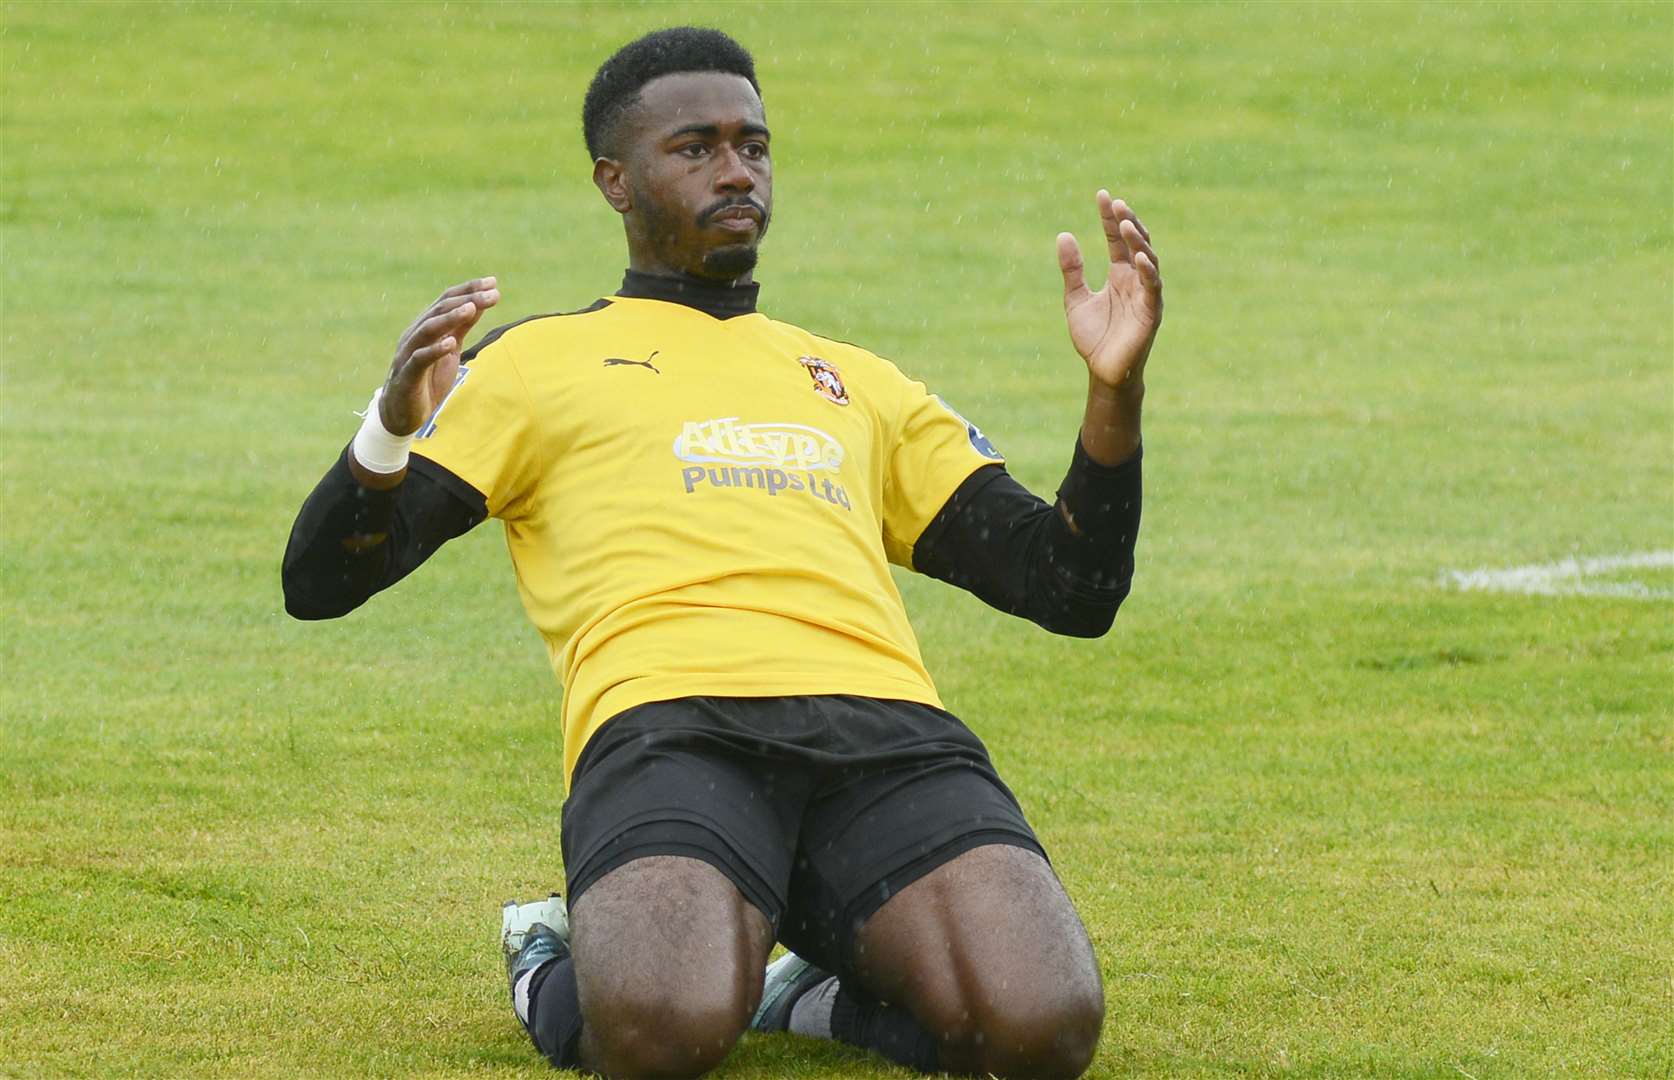 Ira Jackson scored a hat-trick for Folkestone at Bognor on Saturday. Picture: Paul Amos